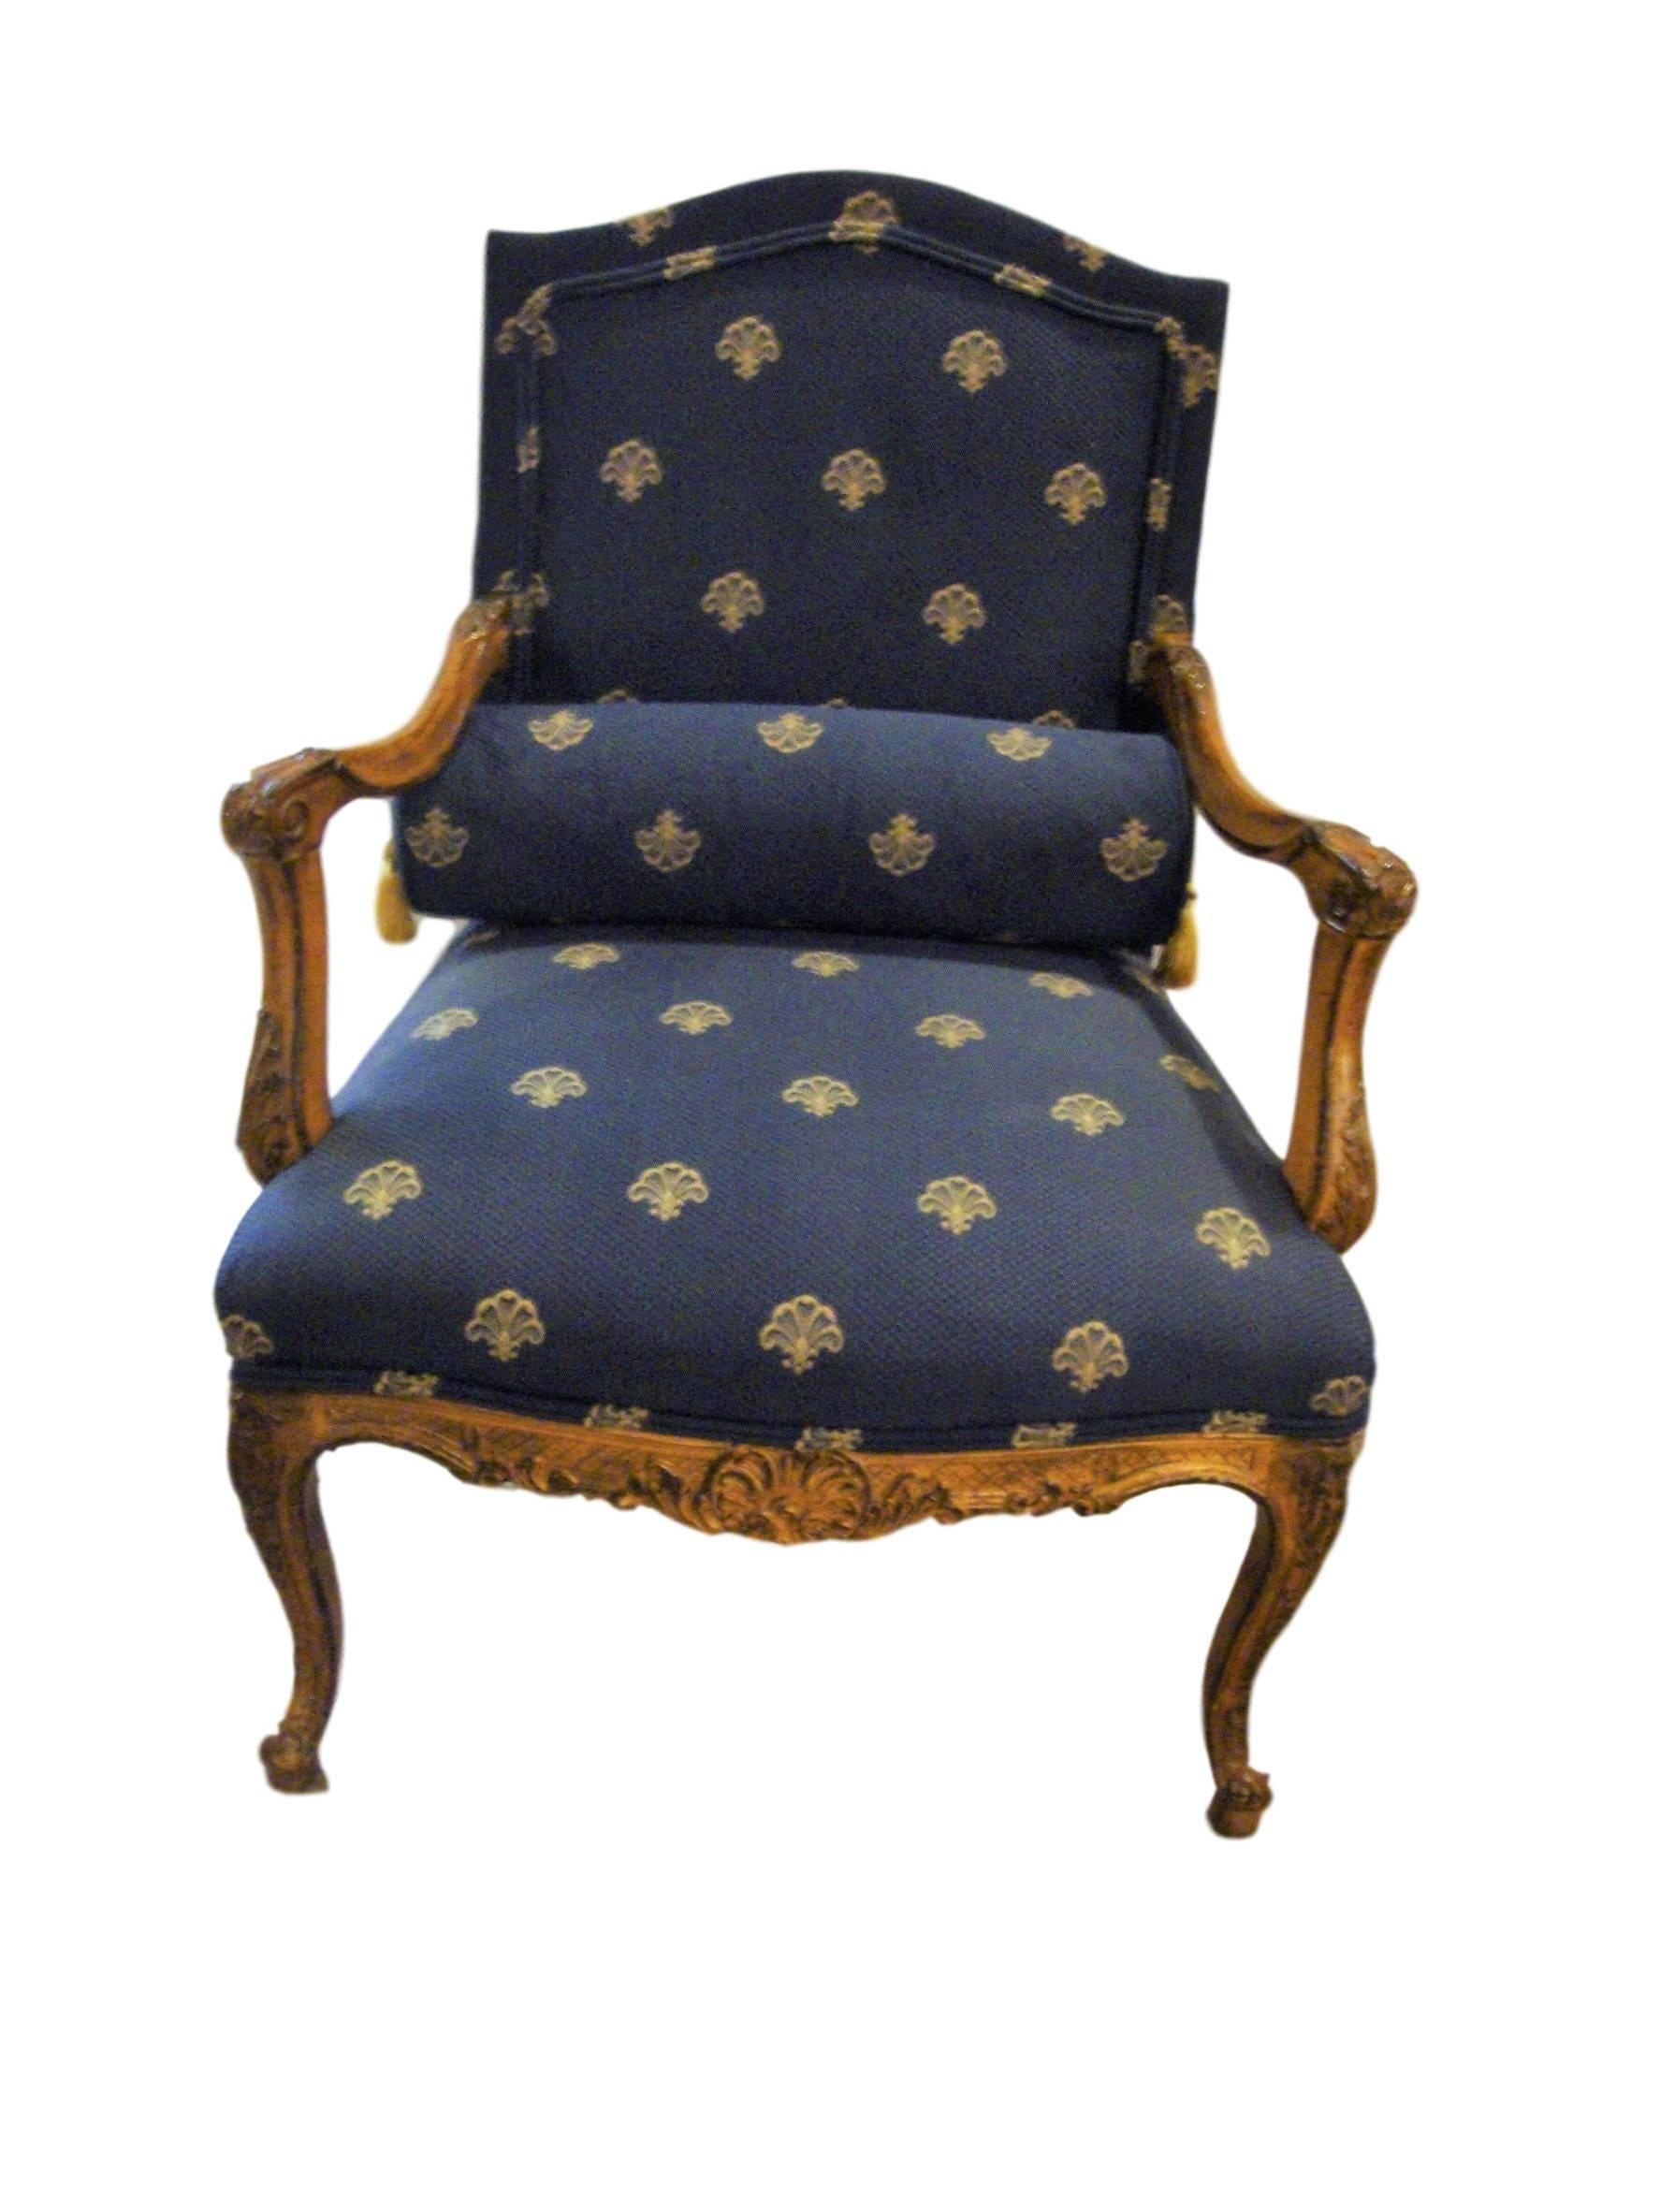 Pair of custom Louis XV style armchairs, finely carved frames and with pillows.

Seat height: 18 inches.